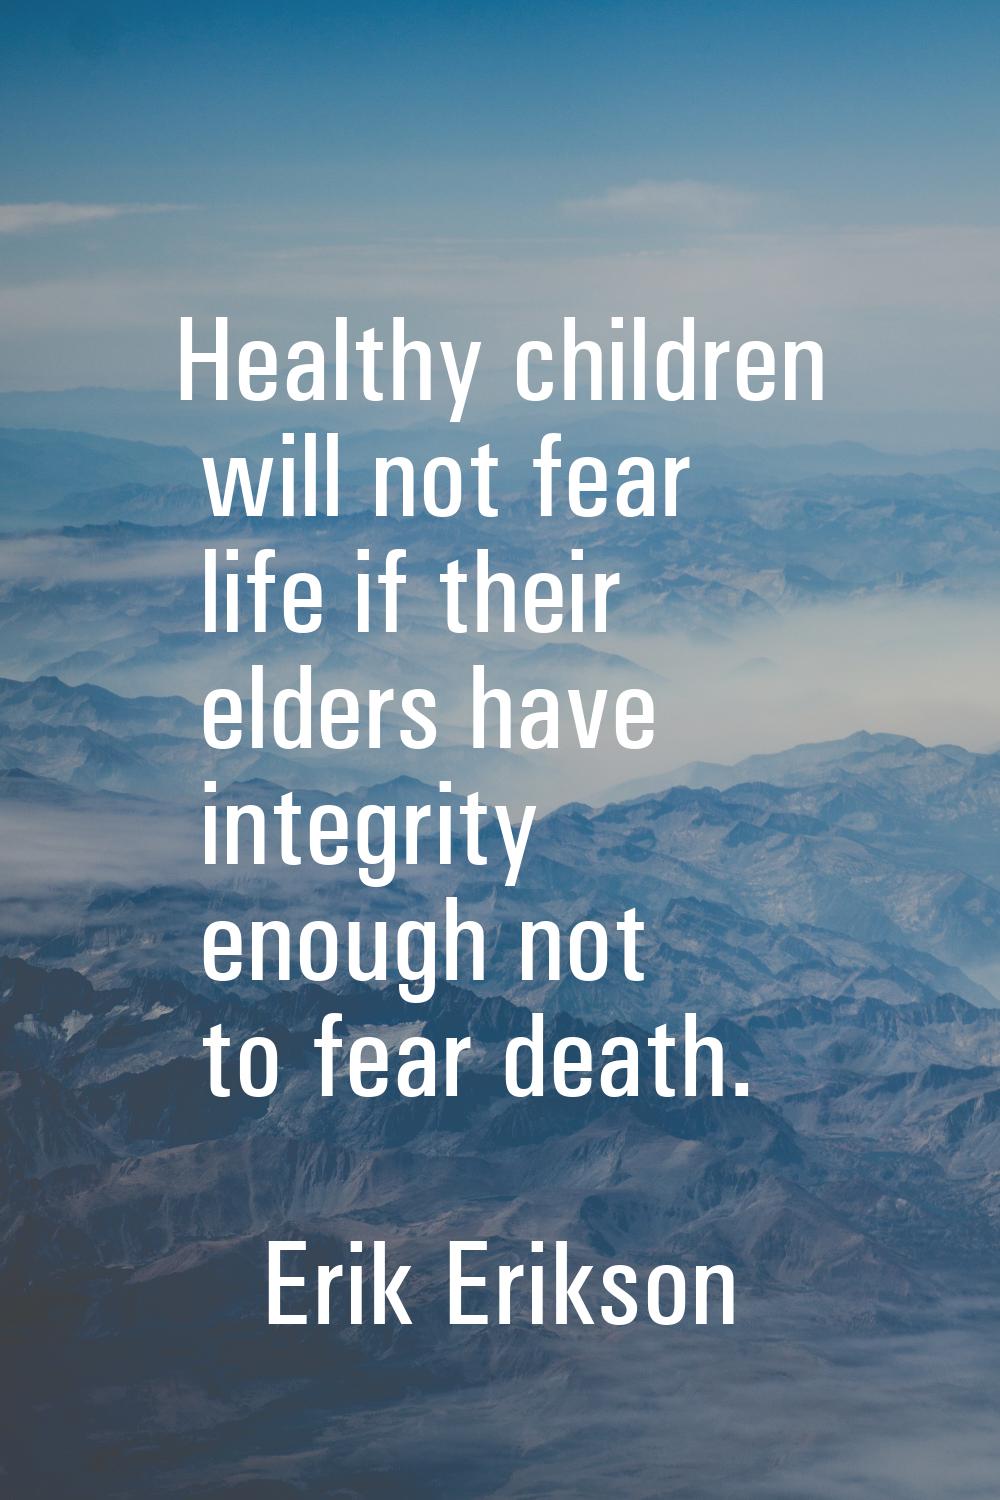 Healthy children will not fear life if their elders have integrity enough not to fear death.